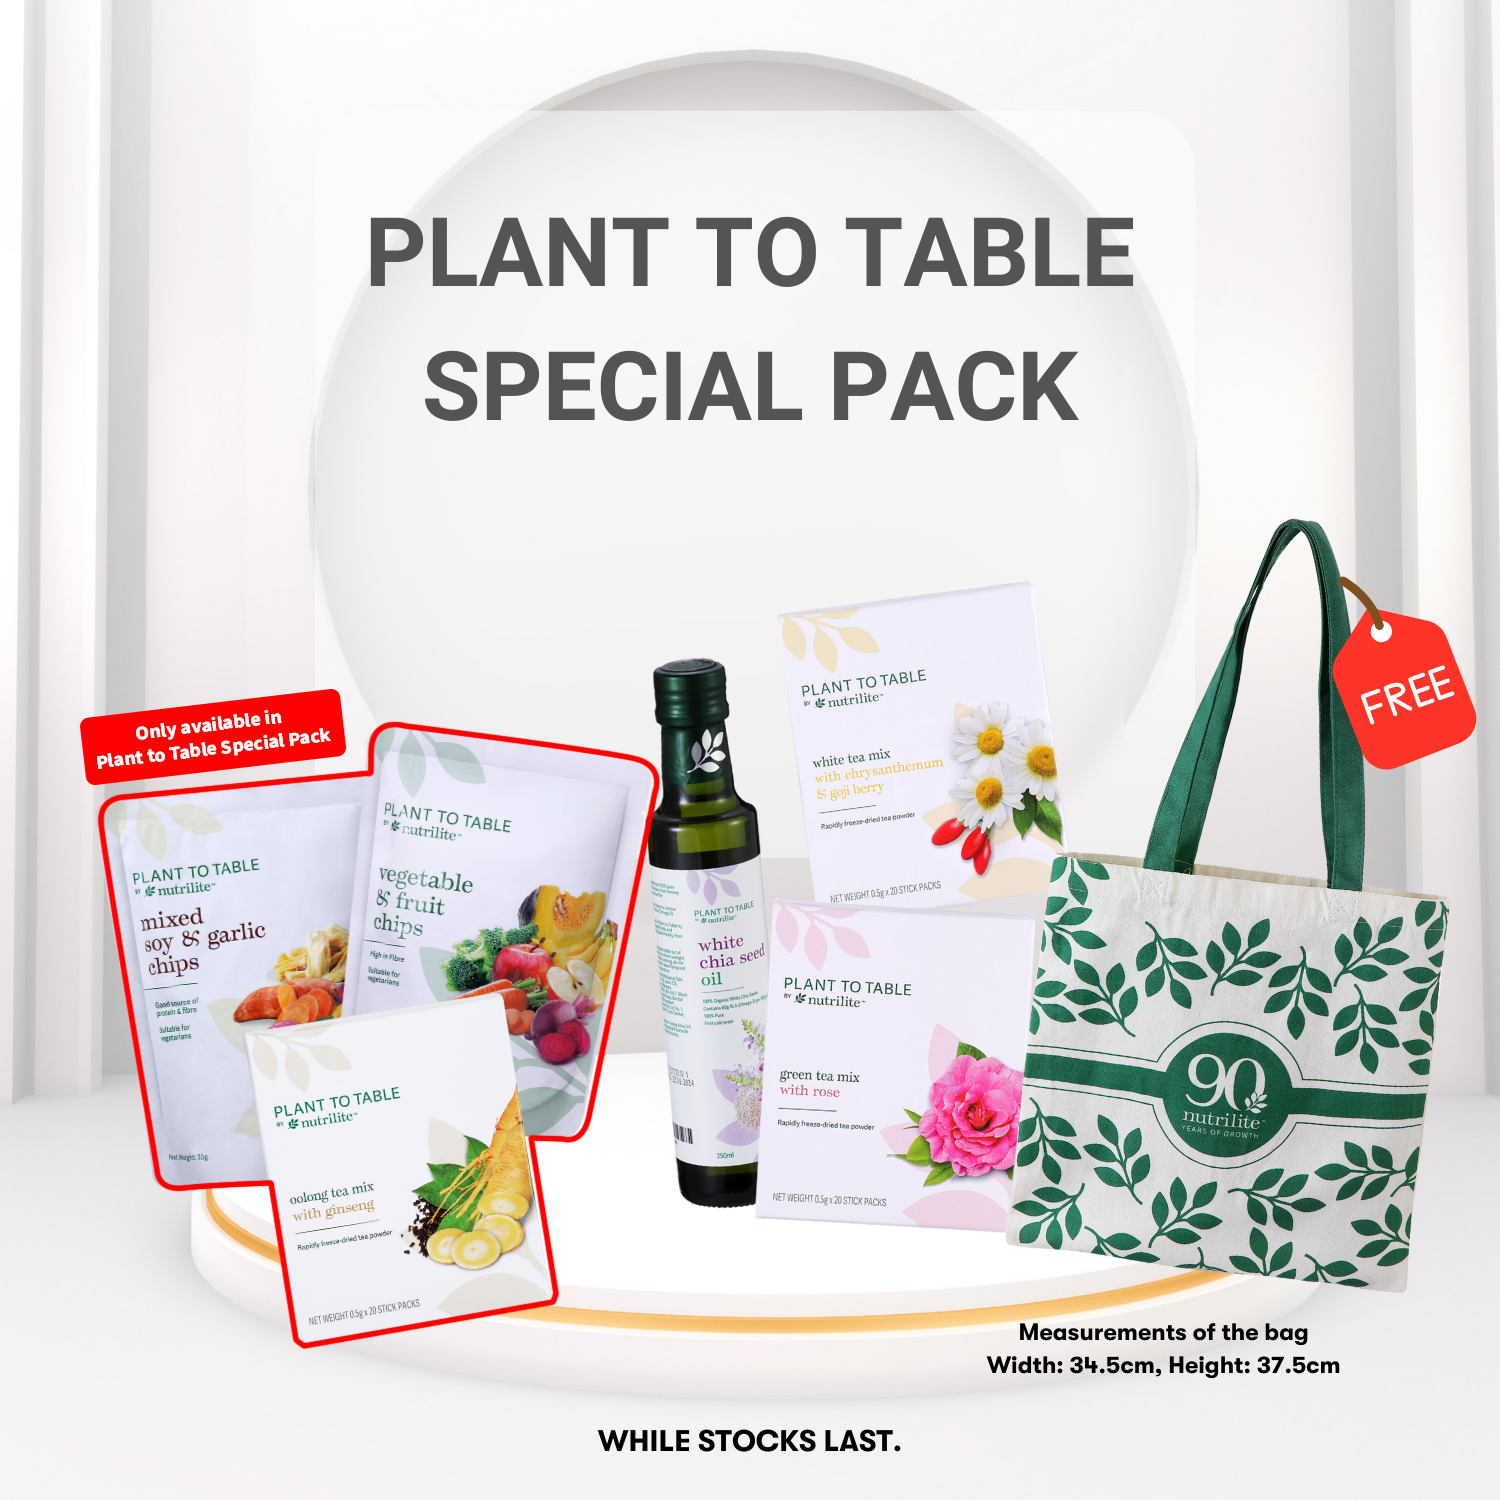 June Nutrilite Overall PWP Promotion